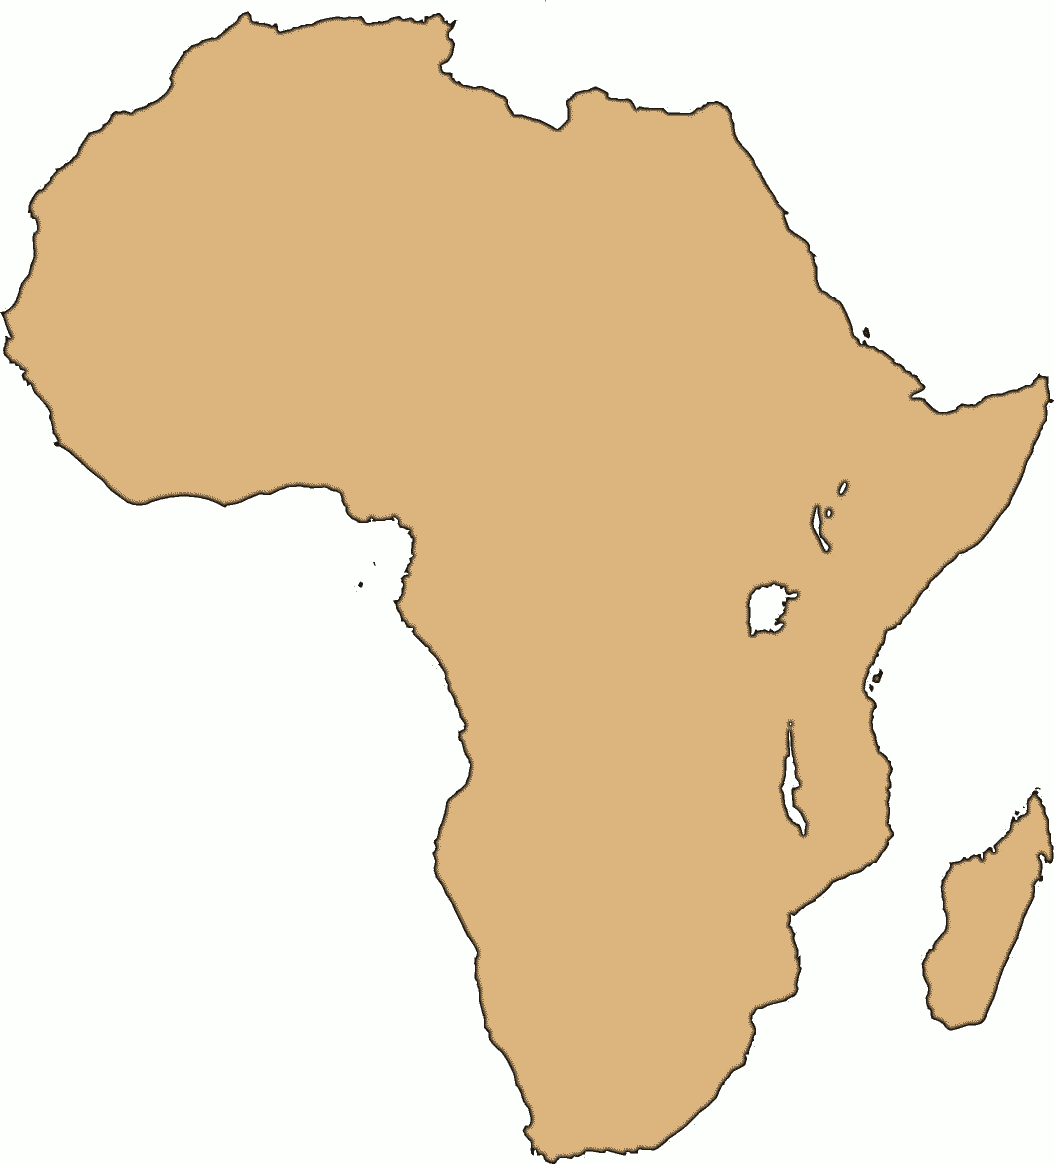 africa clipart map - photo #36